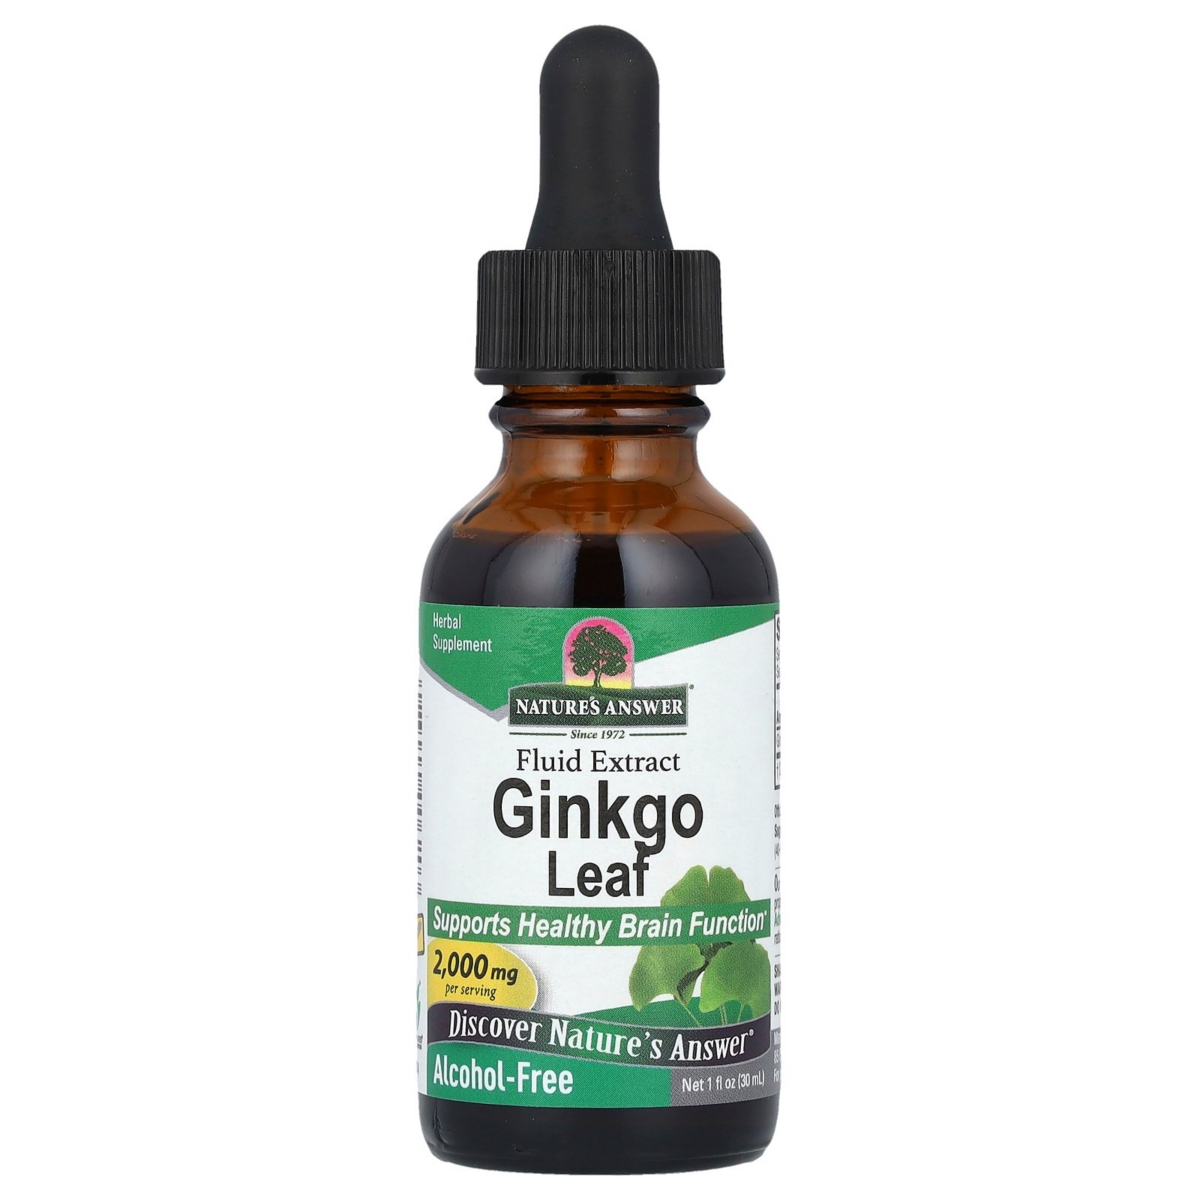 Ginkgo Leaf Fluid Extract Alcohol-Free 2 000 mg - 1 fl oz (30 ml) - Assorted Pre-pack (See Table